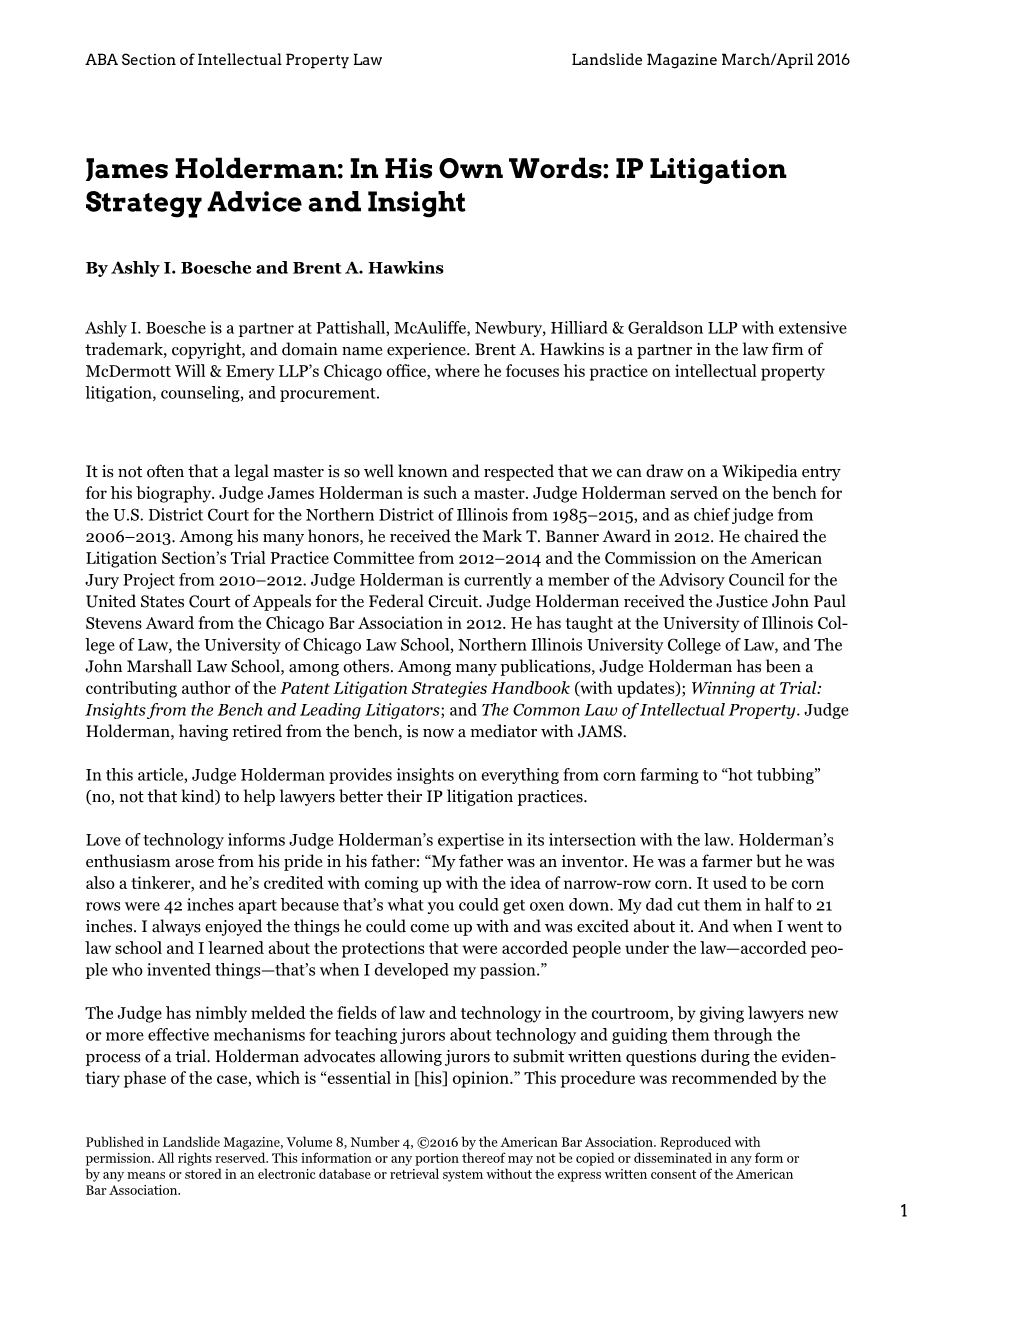 James Holderman: in His Own Words: IP Litigation Strategy Advice and Insight